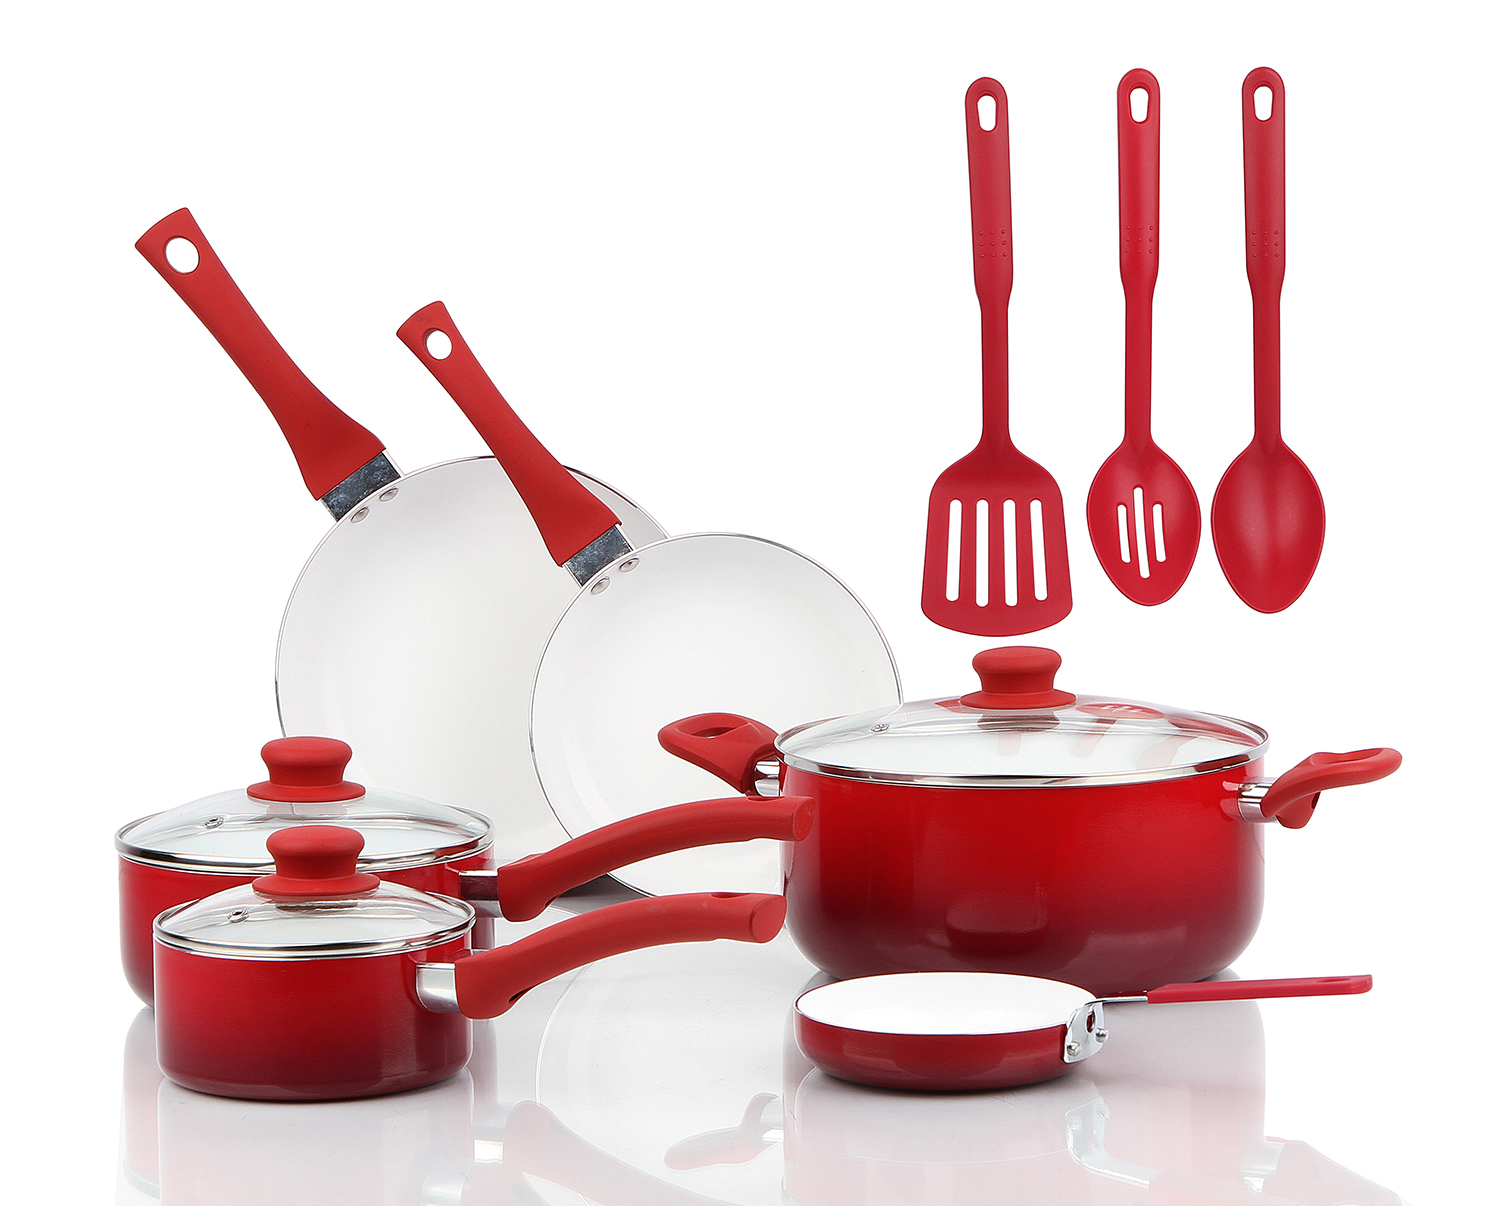 Mainstays Ceramic Nonstick 12 Piece Cookware Set, Red Ombre - image 7 of 8